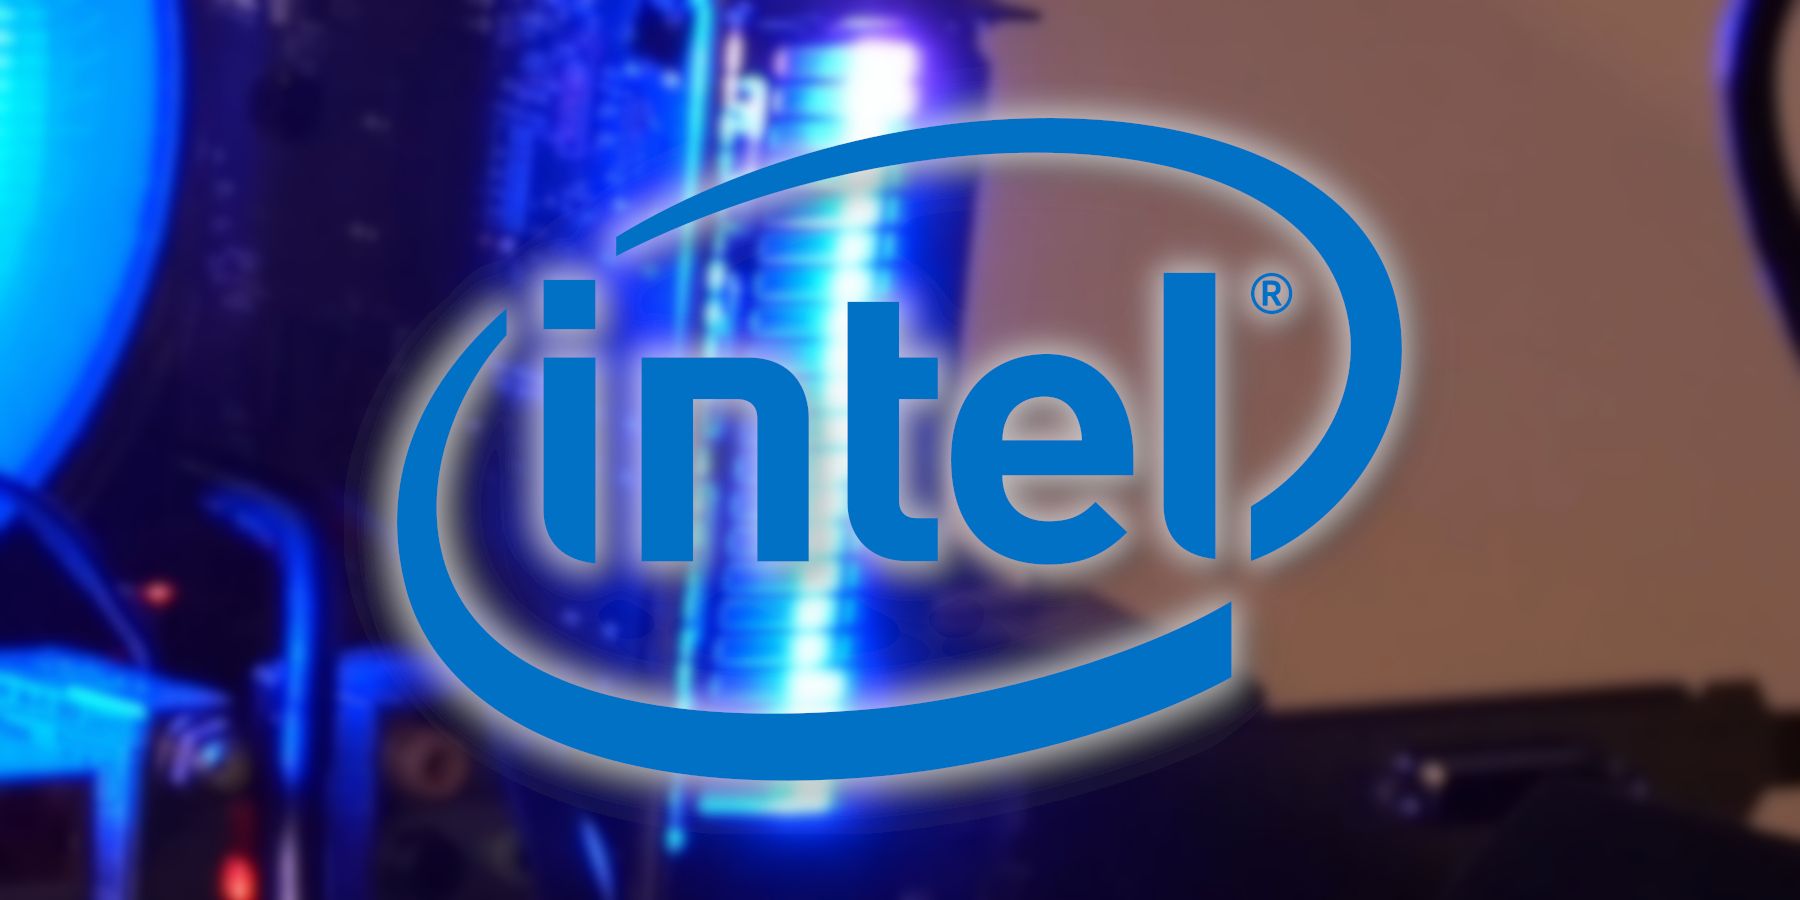 The Intel logo with a blurry image of an Arc GPU in the background.